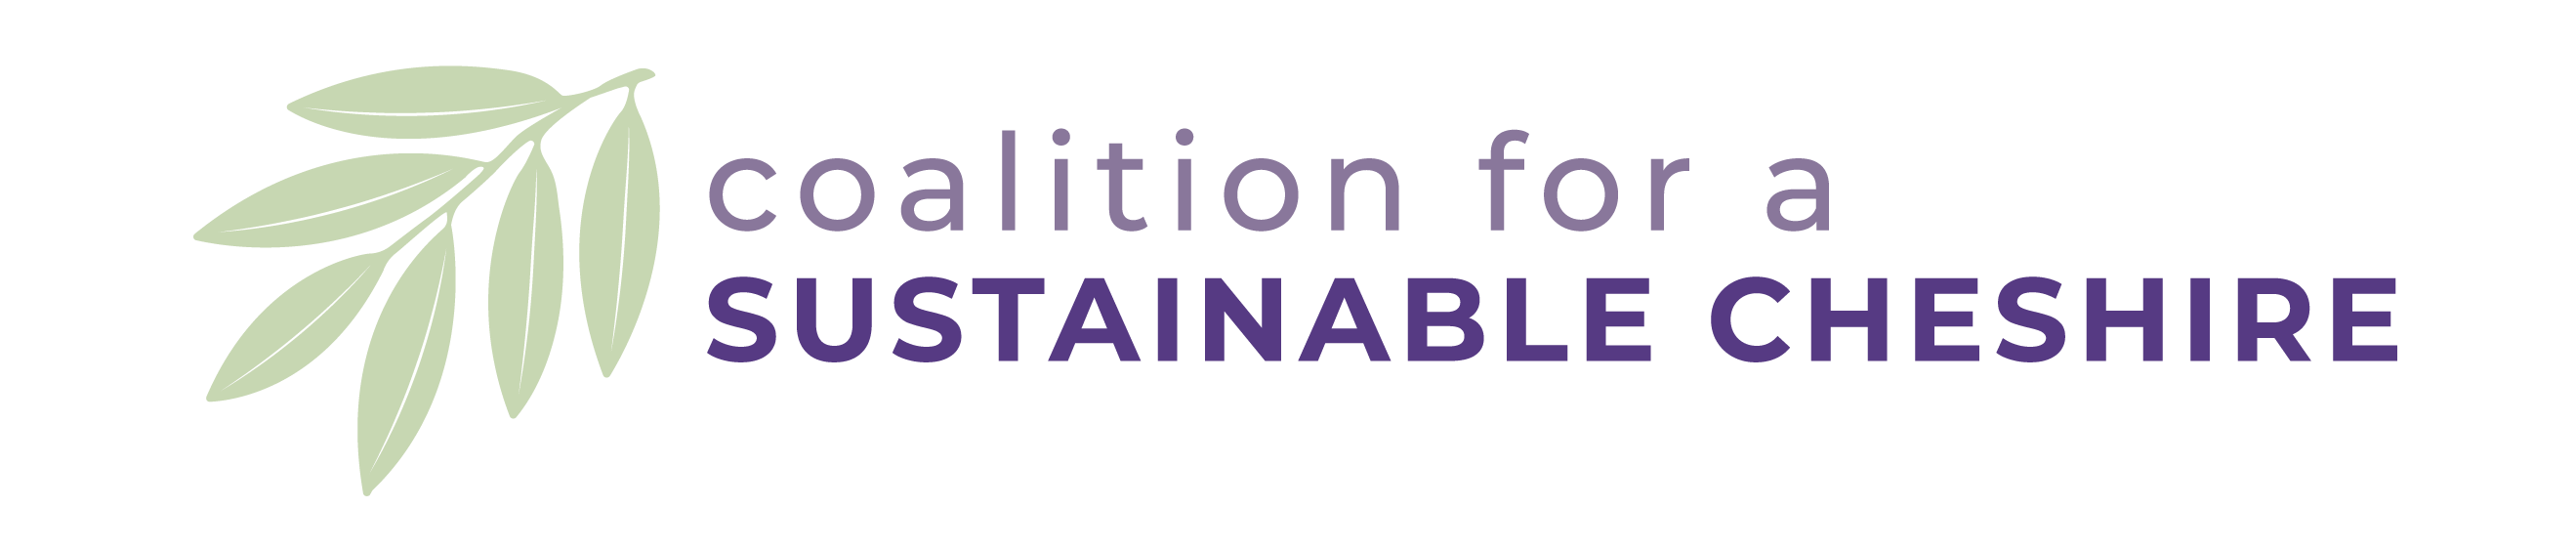 Coalition for a Sustainable Cheshire